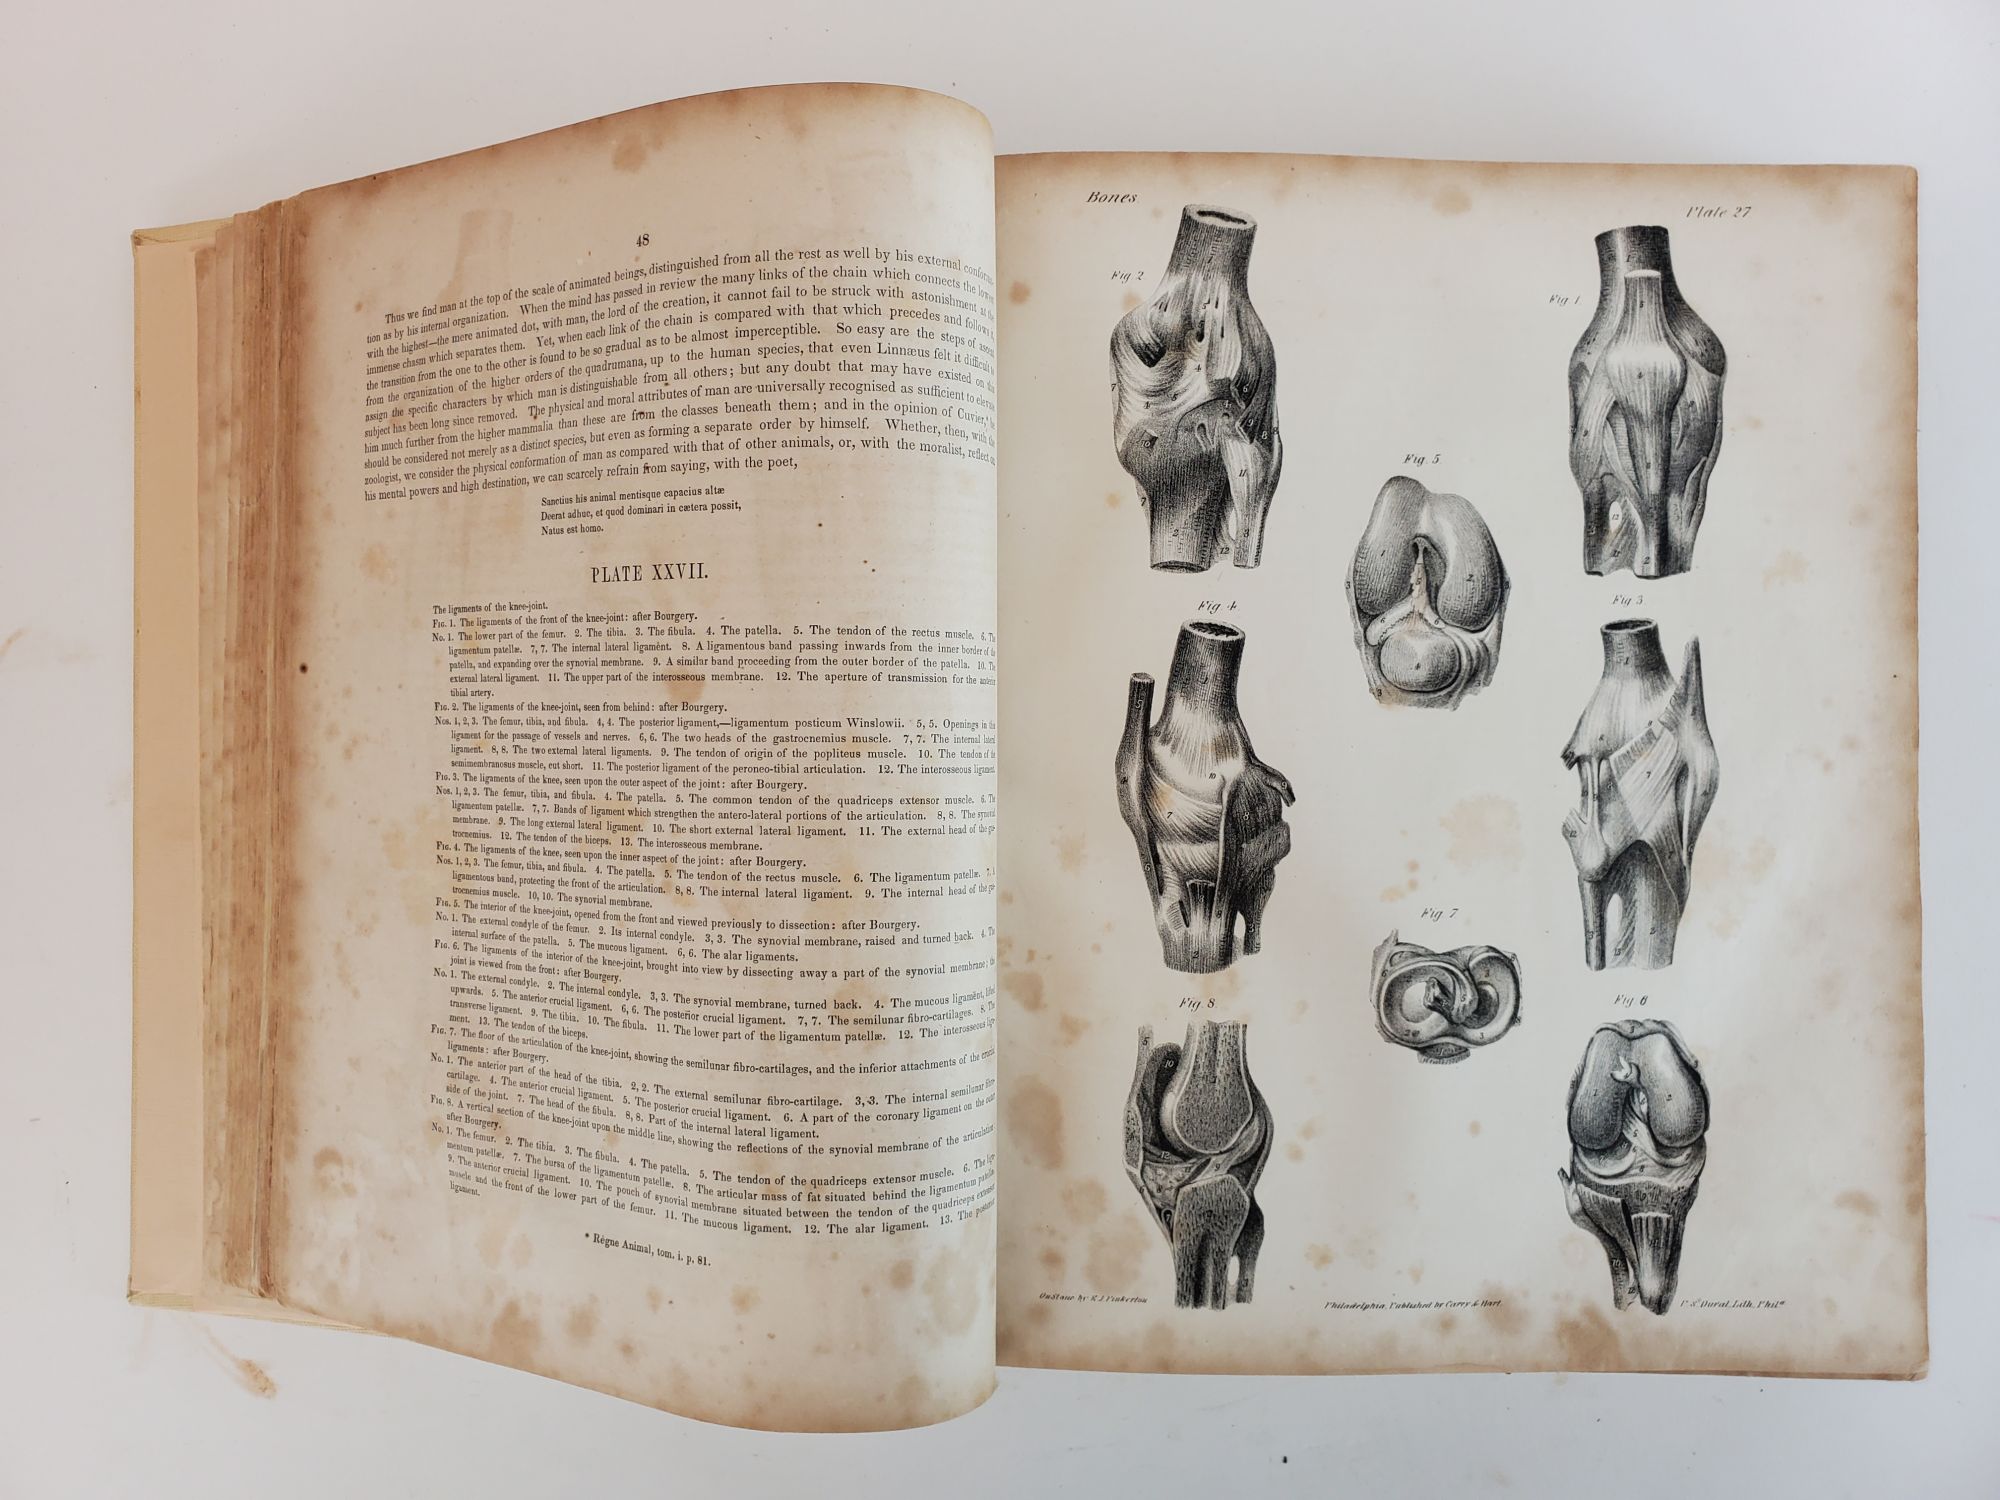 Product Image for A SERIES OF ANATOMICAL PLATES; WITH REFERENCES AND PHYSIOLOGICAL COMMENTS, ILLUSTRATING THE STRUCTURE OF THE DIFFERENT PARTS OF THE HUMAN BODY